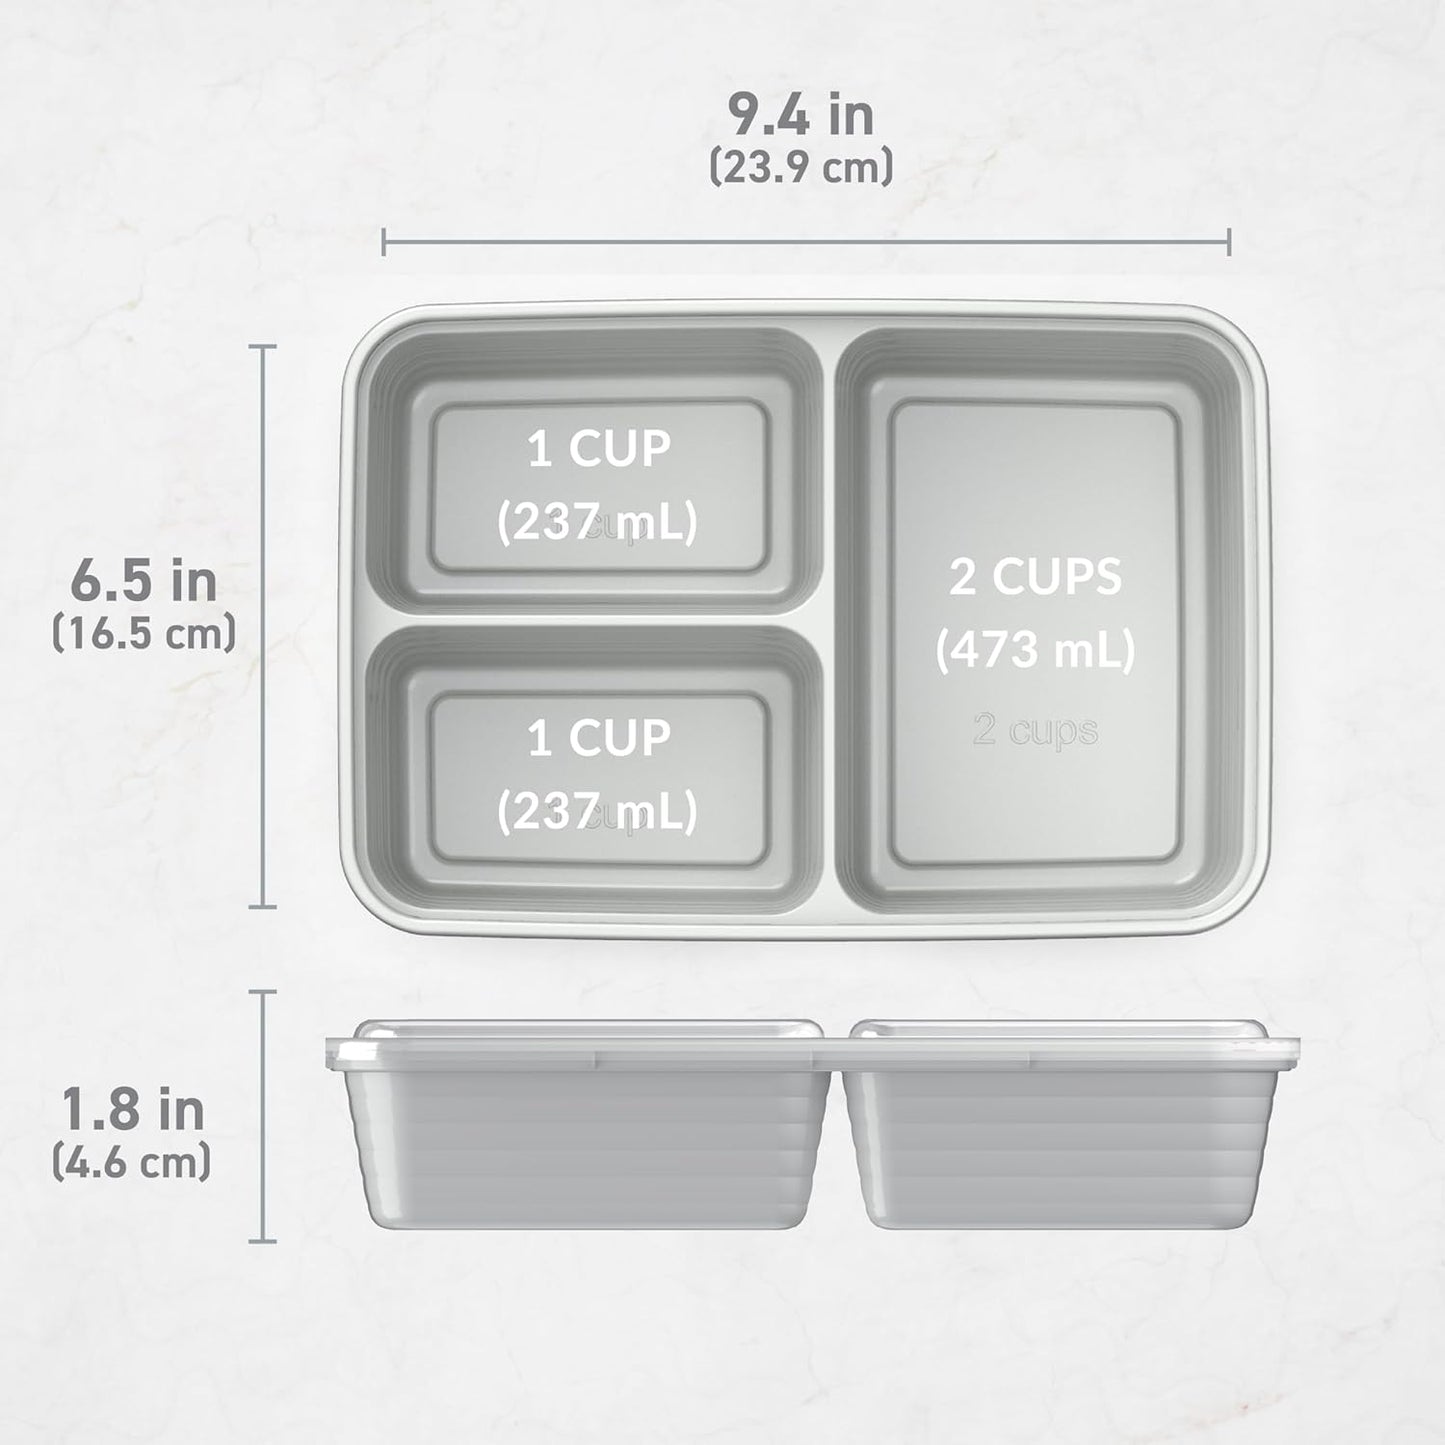 20-Piece Lightweight, Durable, Reusable BPA-Free 3-Compartment Containers - Microwave, Freezer